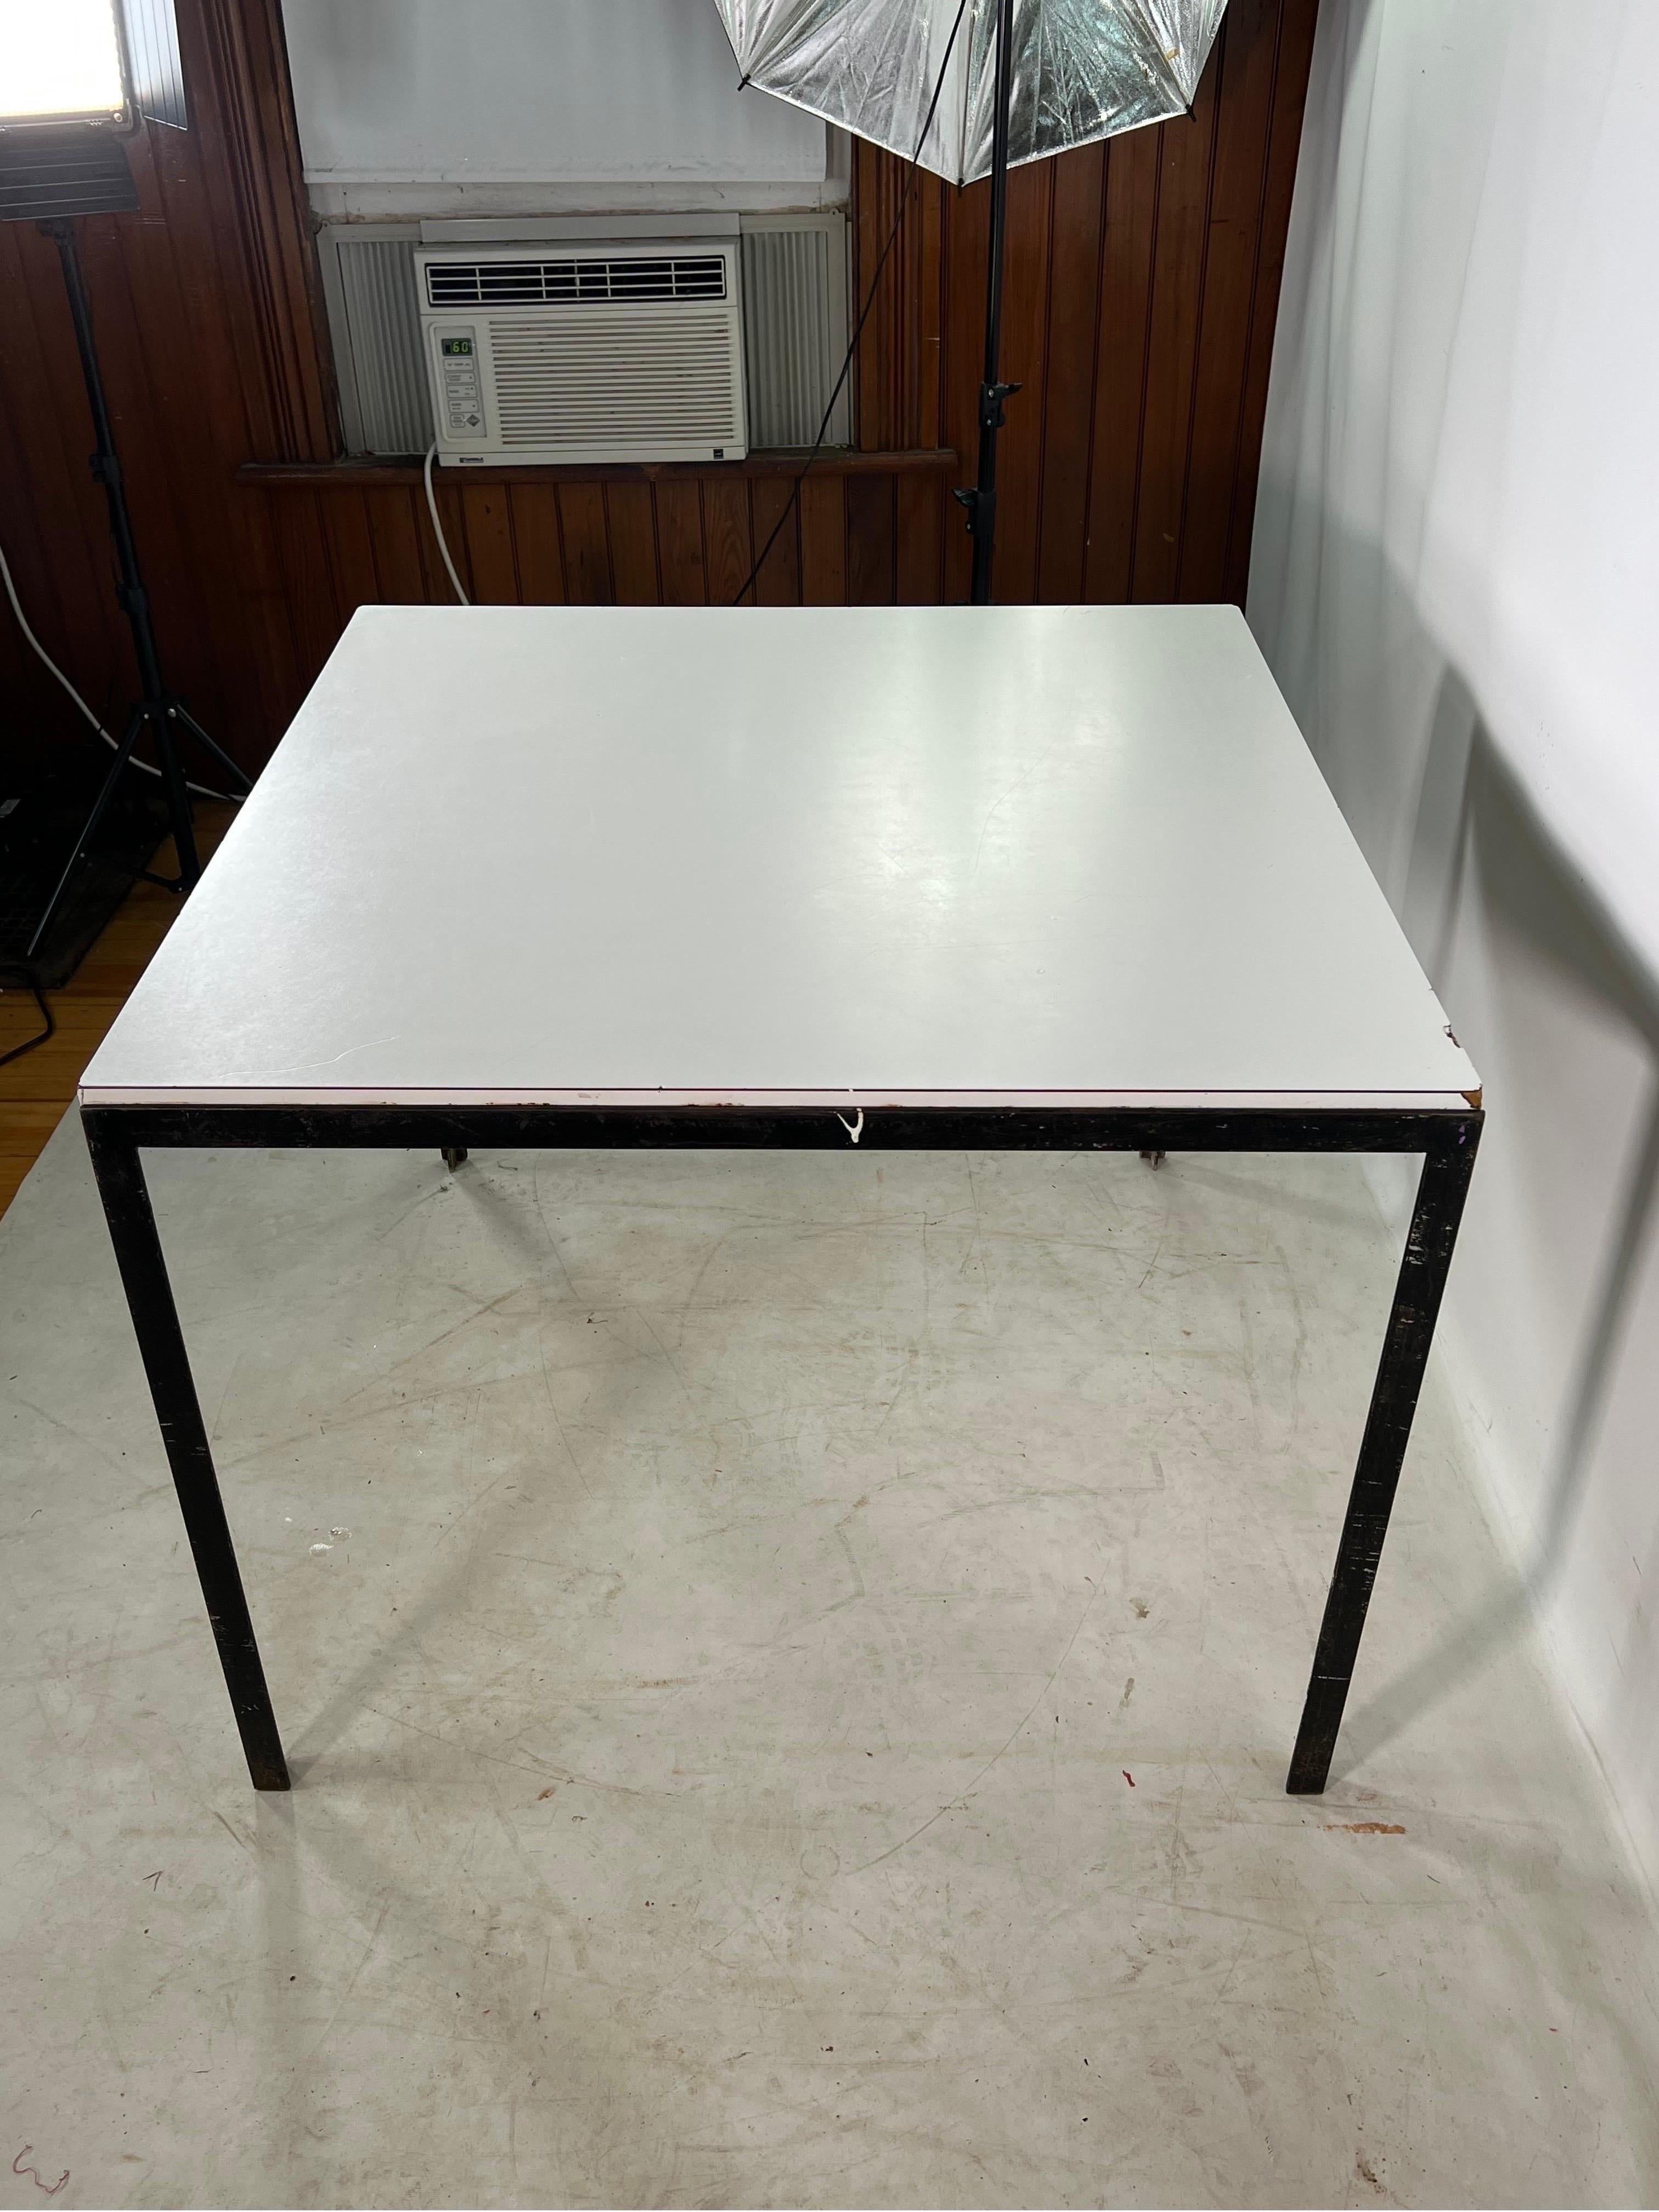 Mid Century Florence Knoll Iron T bar kitchen table. The table is made out of CastIron and has a white Laminate top.